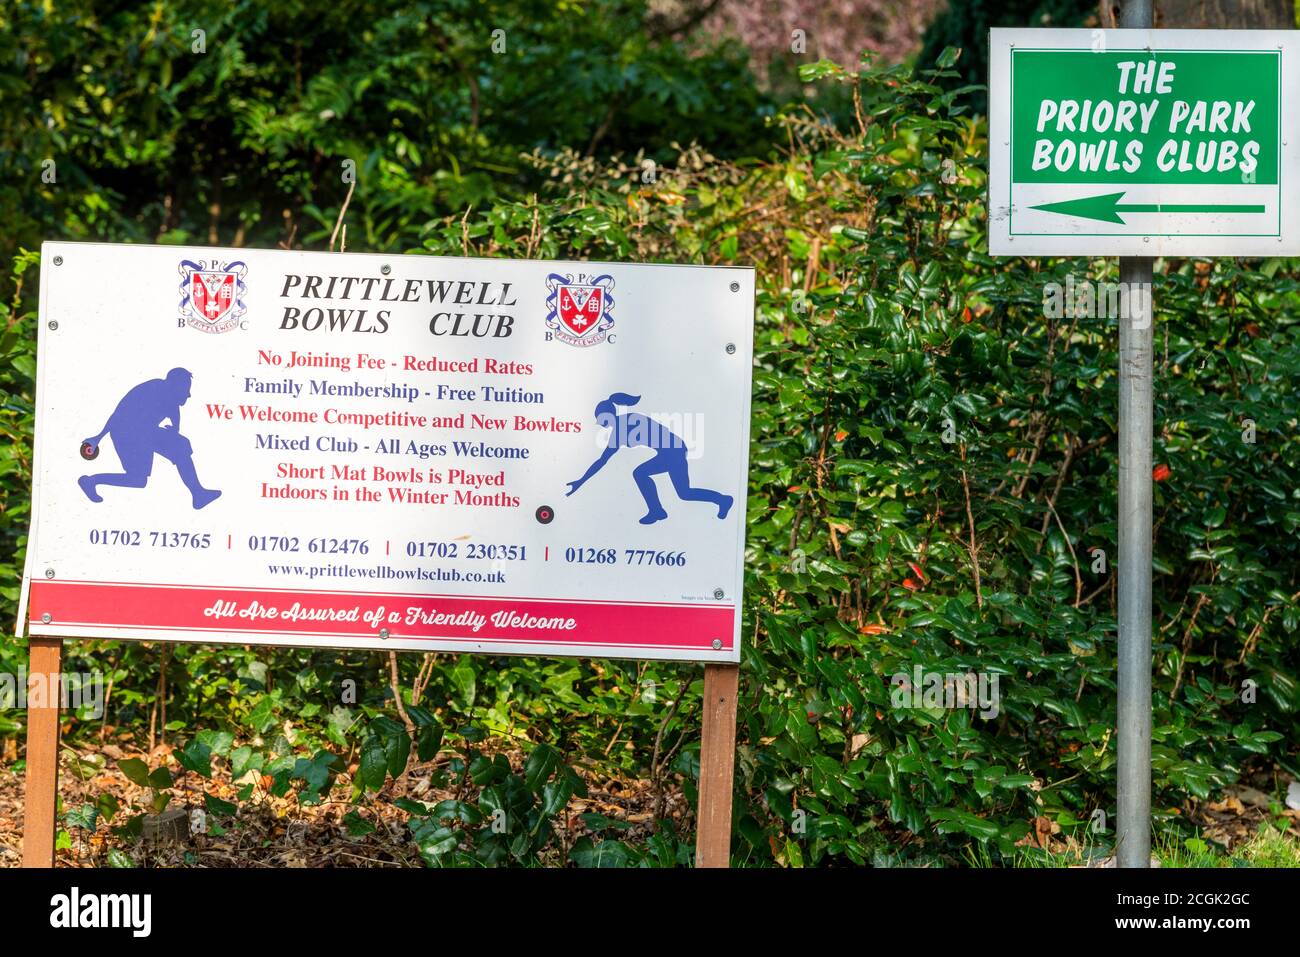 Prittlewell Bowls Club, The Priory Park Bowls Clubs, signs in Priory Park, Southend on Sea, Essex, UK. Bowls club notices with directions Stock Photo